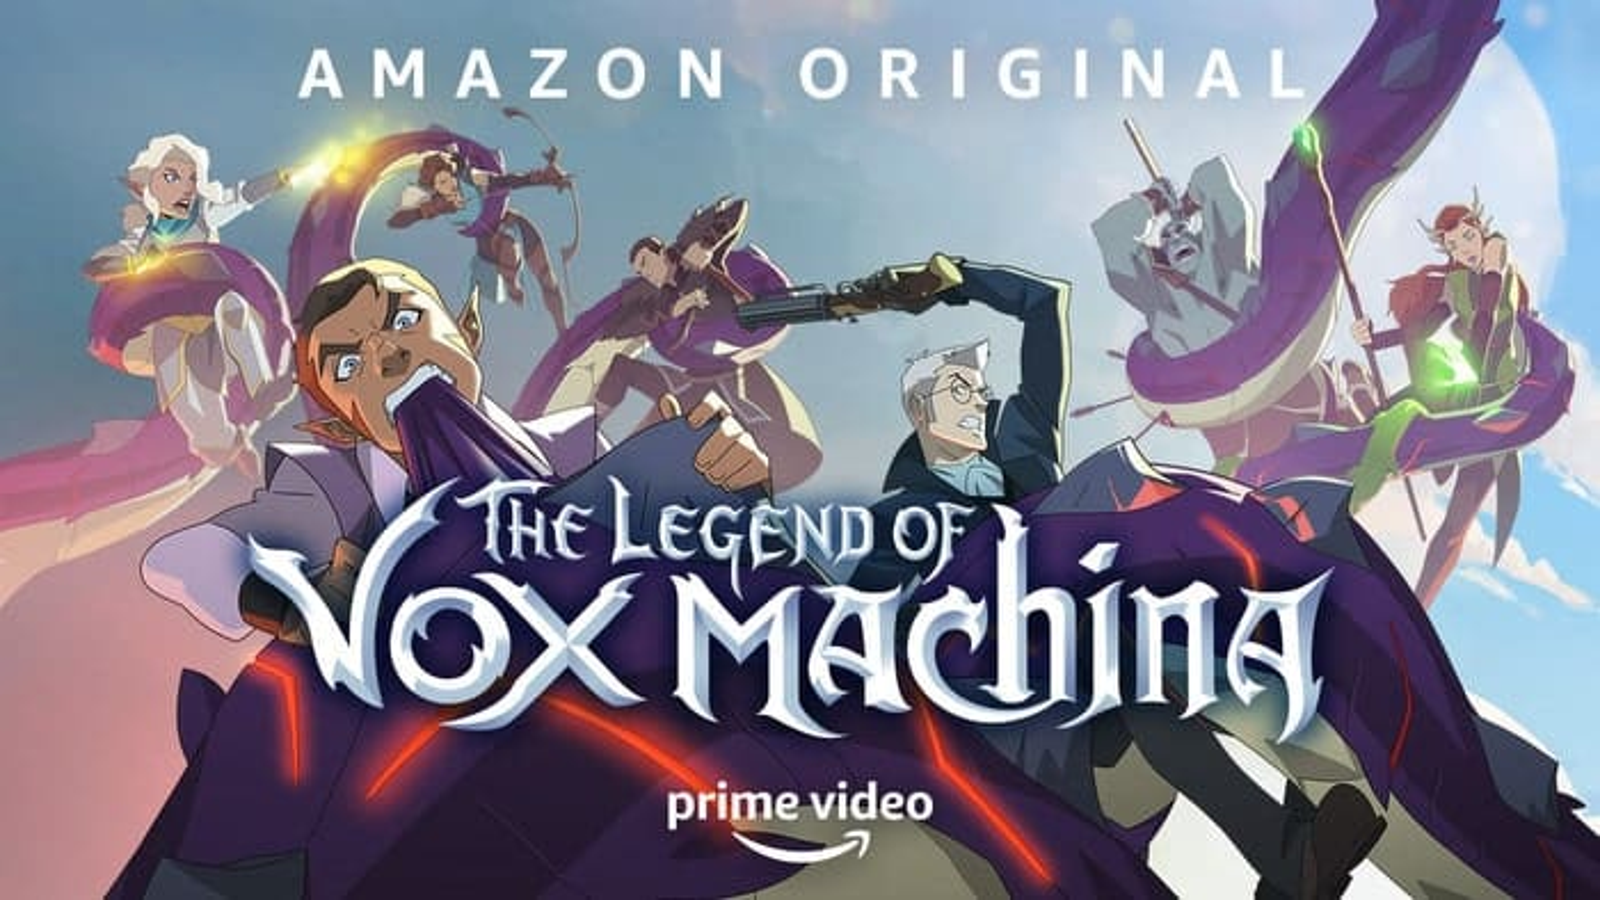 The legend of vox machina season 3: Release Date, Cast, Trailer, Plot,  where to watch?